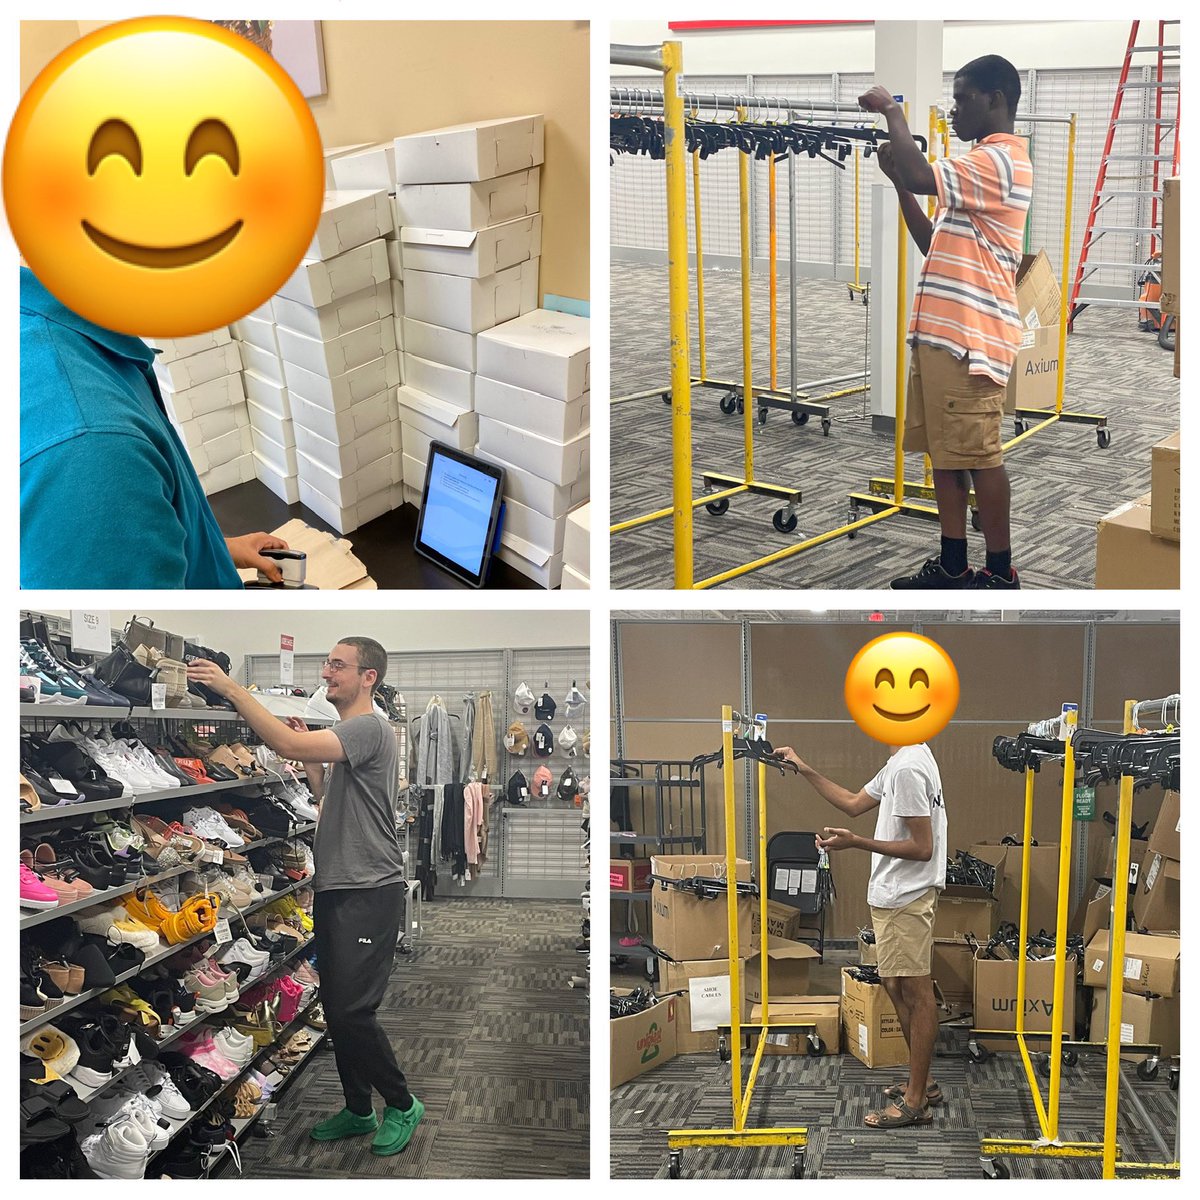 We always say our students are ROCKSTARS and it is so true! This summer we’ve been working two days a week for our WBL experiences - They’ve been doing AMAZING! #lhsworks @dadamltps @robyn_klim @Mrs_Sasse_LTPS @LTPS1 @CardinalsLHS